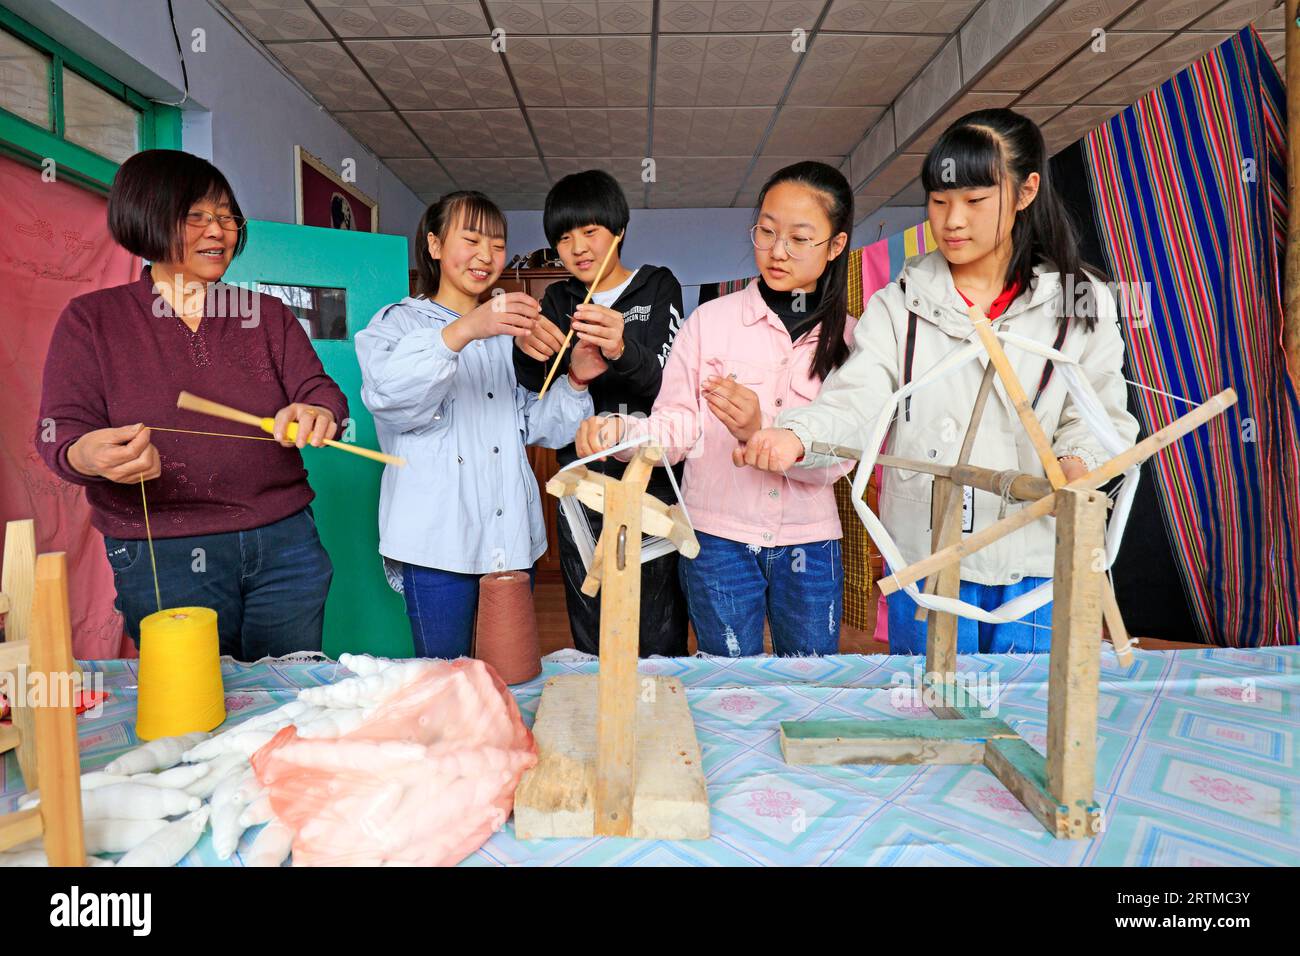 Luannan County, March 30, 2018: Indigenous weaving technology inheriting people, guiding students to use spinning workers, Luannan County, Hebei Provi Stock Photo